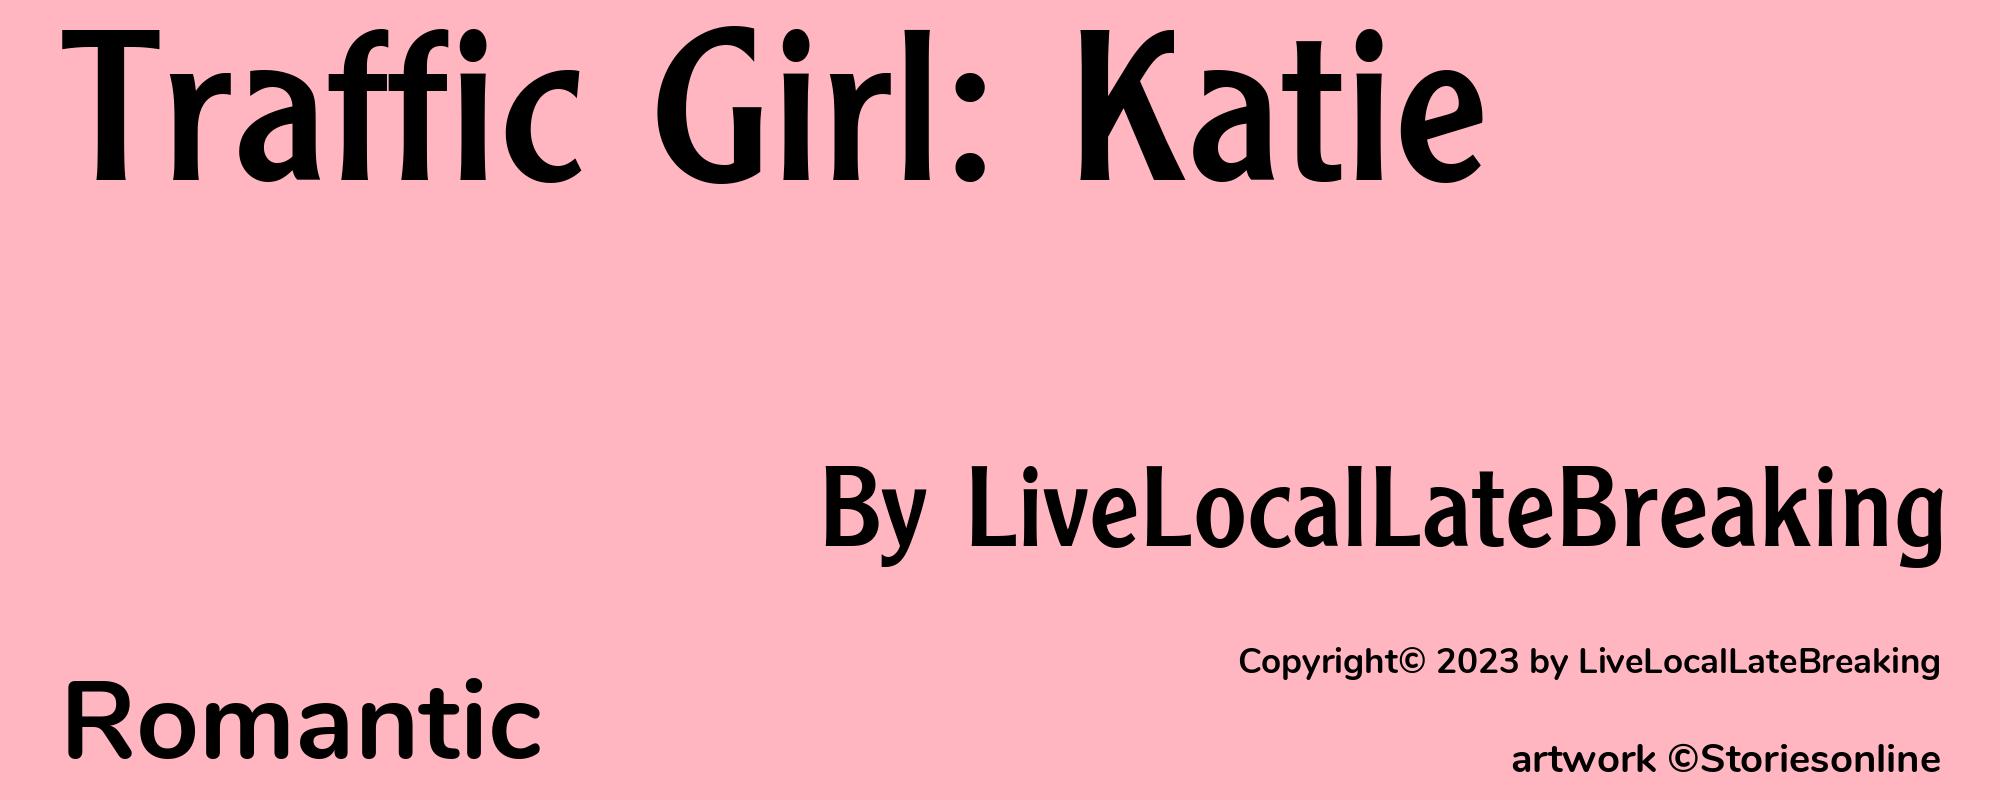 Traffic Girl: Katie - Cover